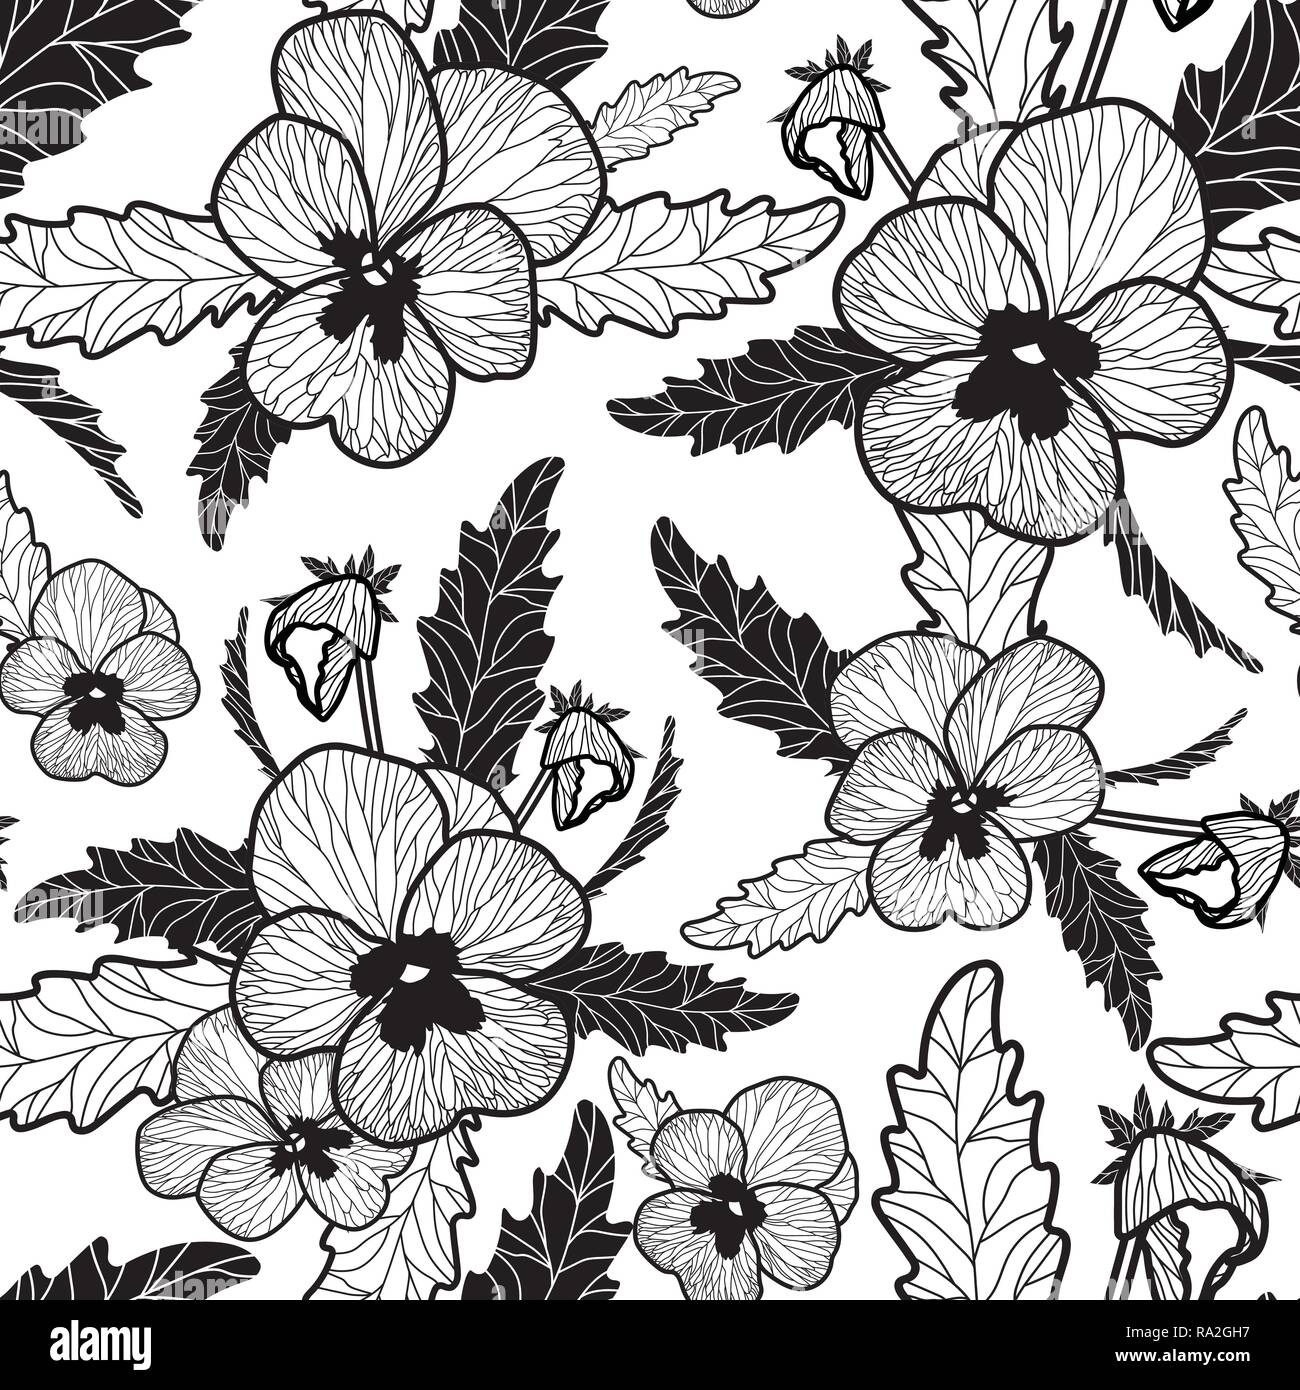 Floral Vector seamless pattern with black line pansies on white background. Retro Vintage style pattern. Perfect for weddings and anniversary cards Stock Vector